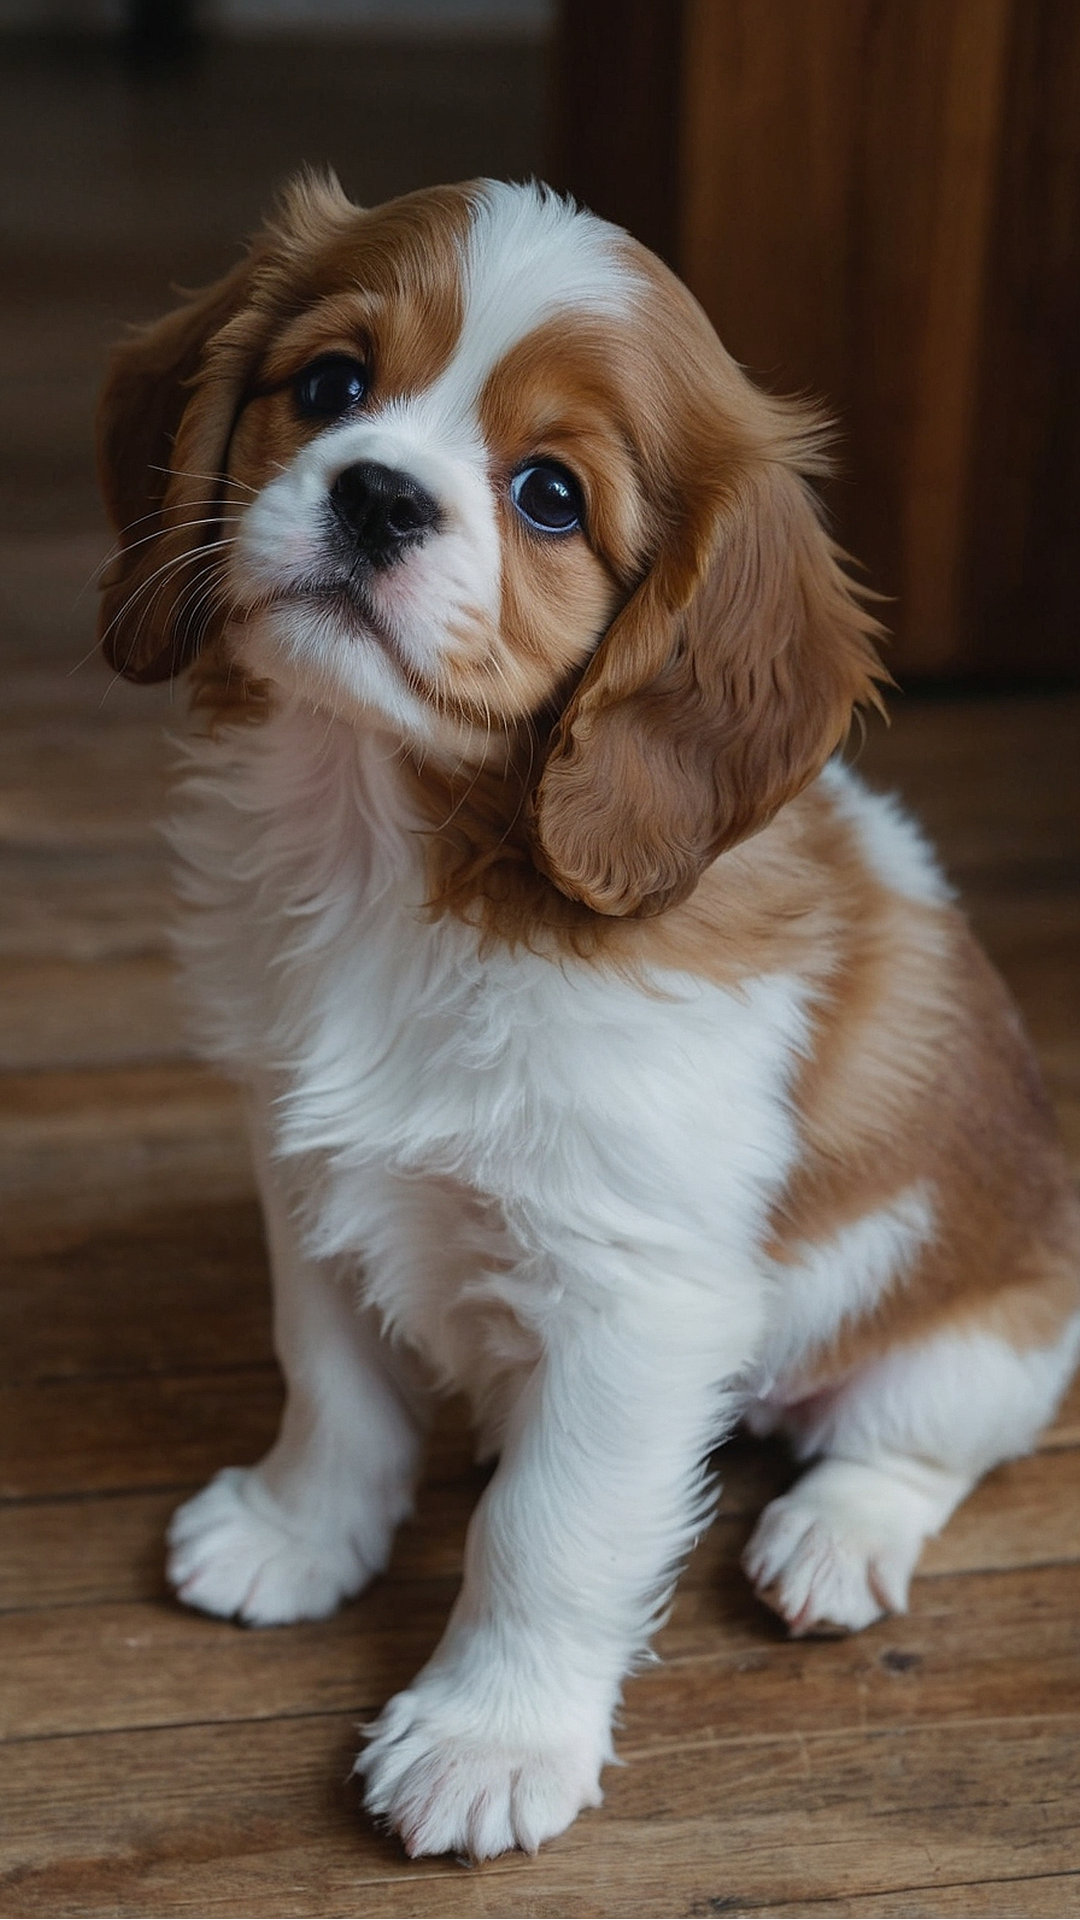 Woof-tastic Cuteness: Charming Puppies That Will Melt Your Heart